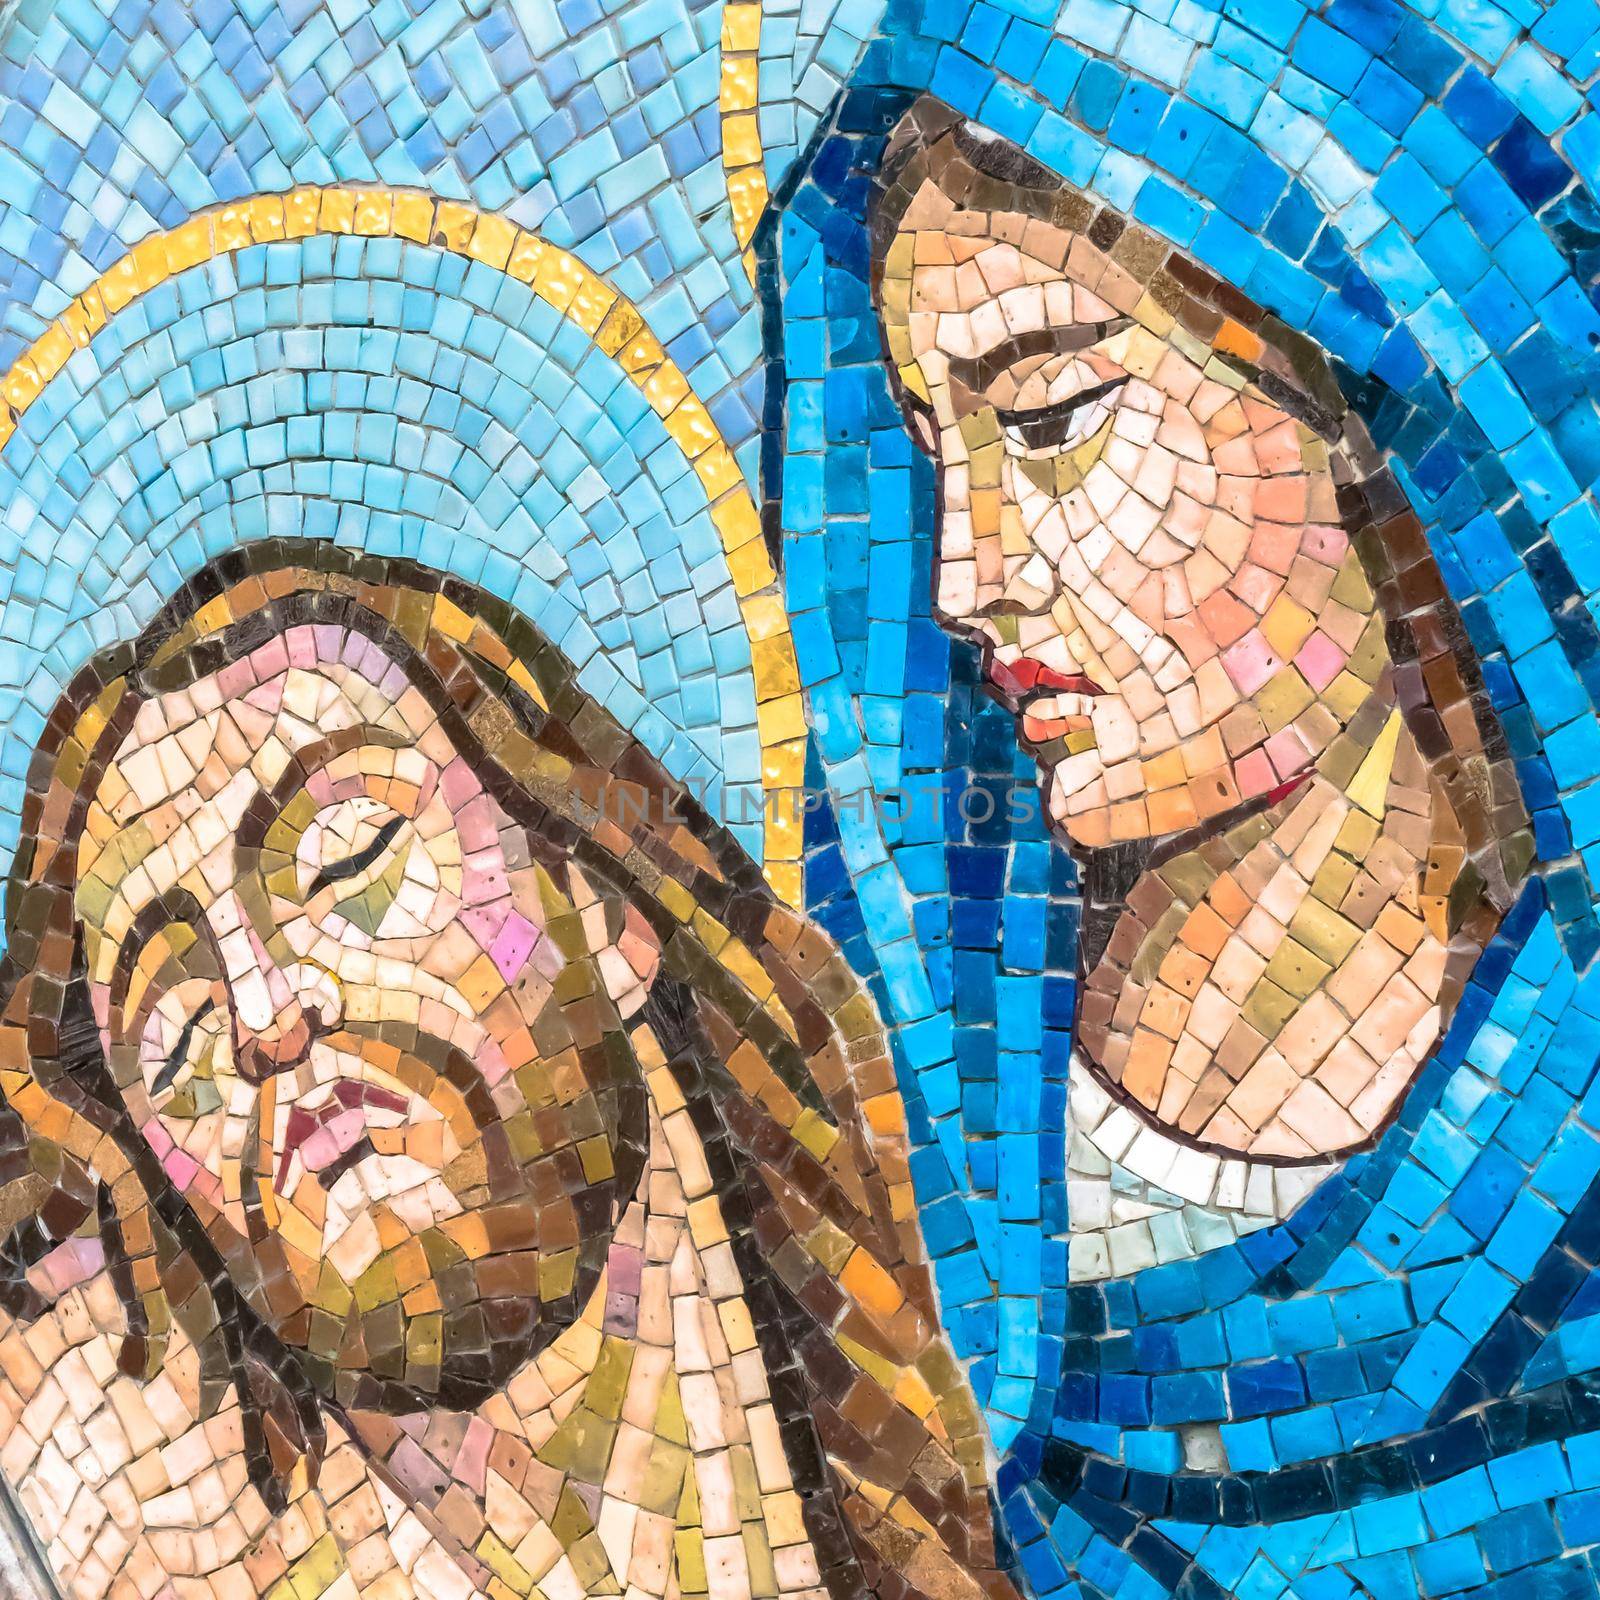 Mosaic depiction of Christ's body being in the arms of the Virgin Mary